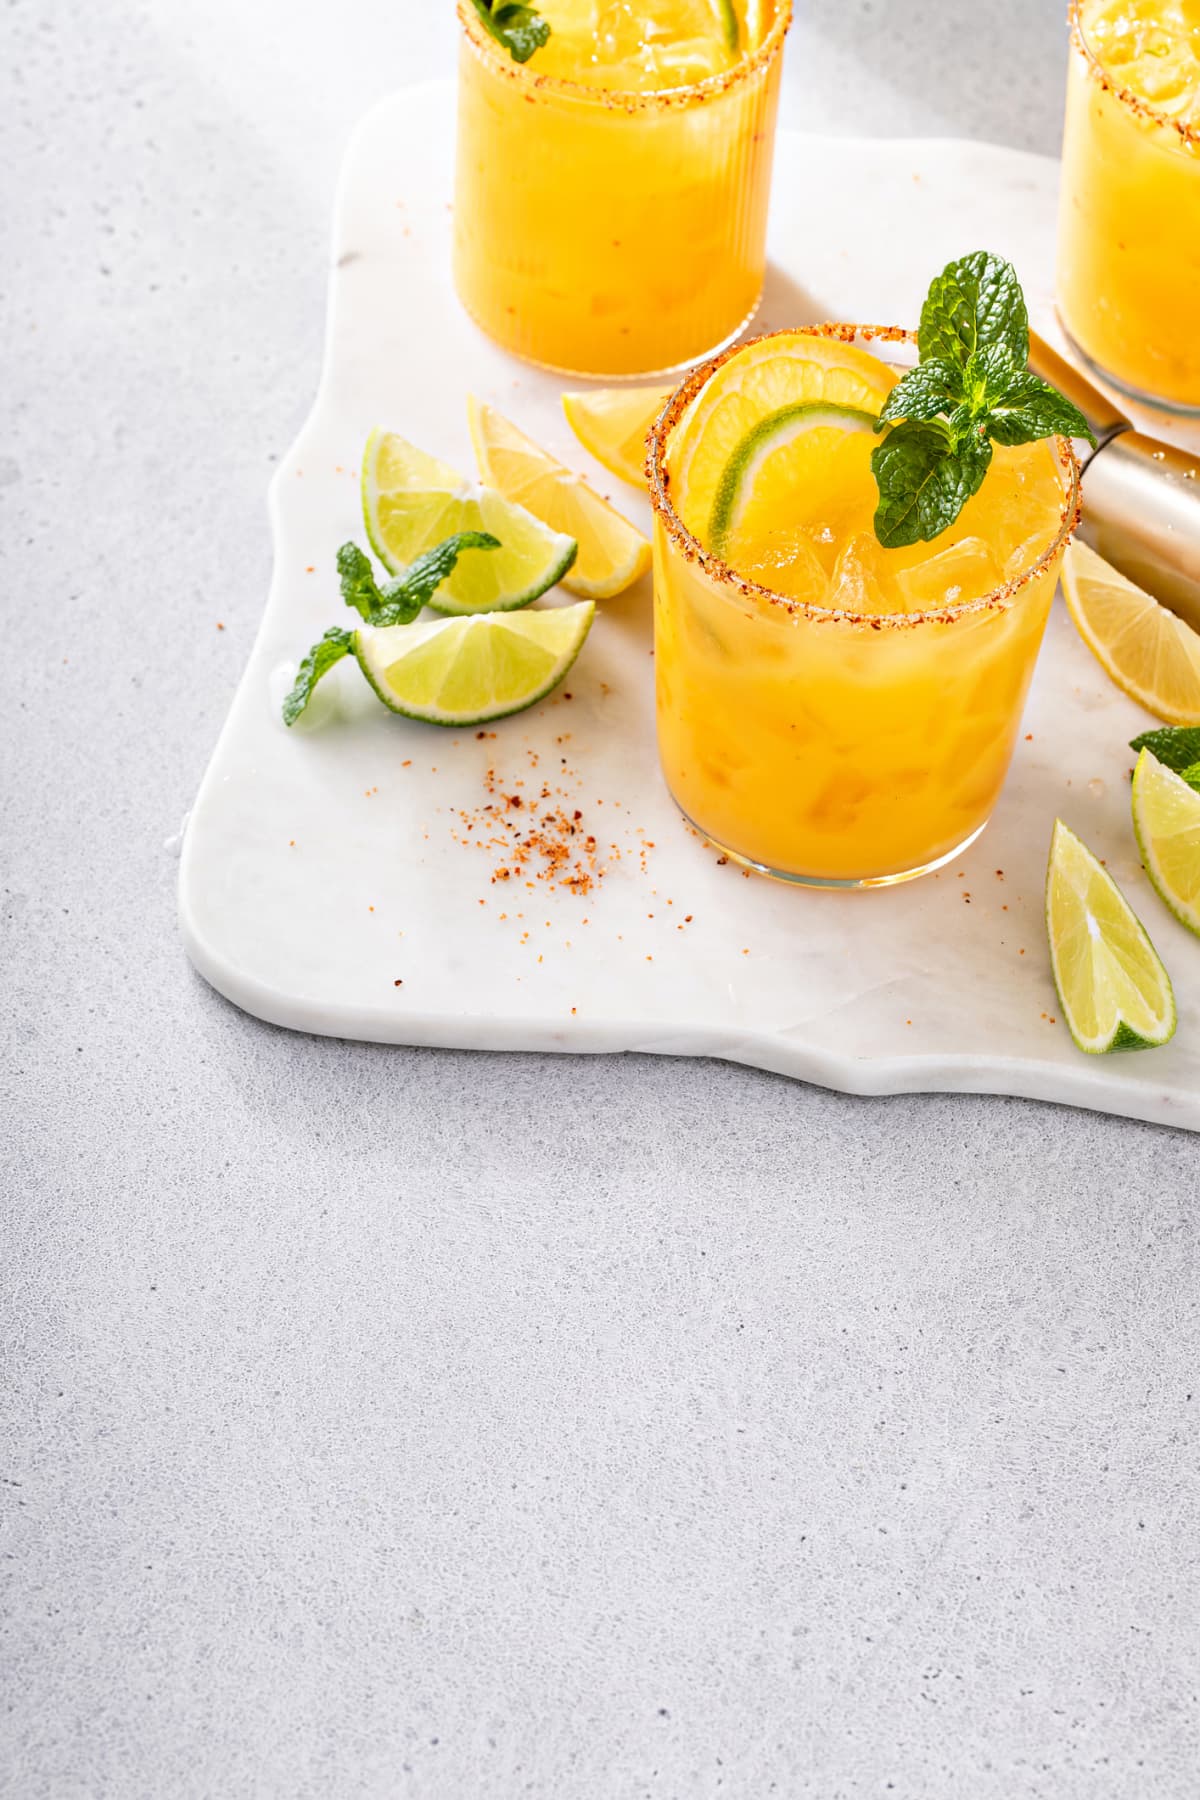 Triple citrus margarita with orange, lemon and lime garnished with mint with copy space